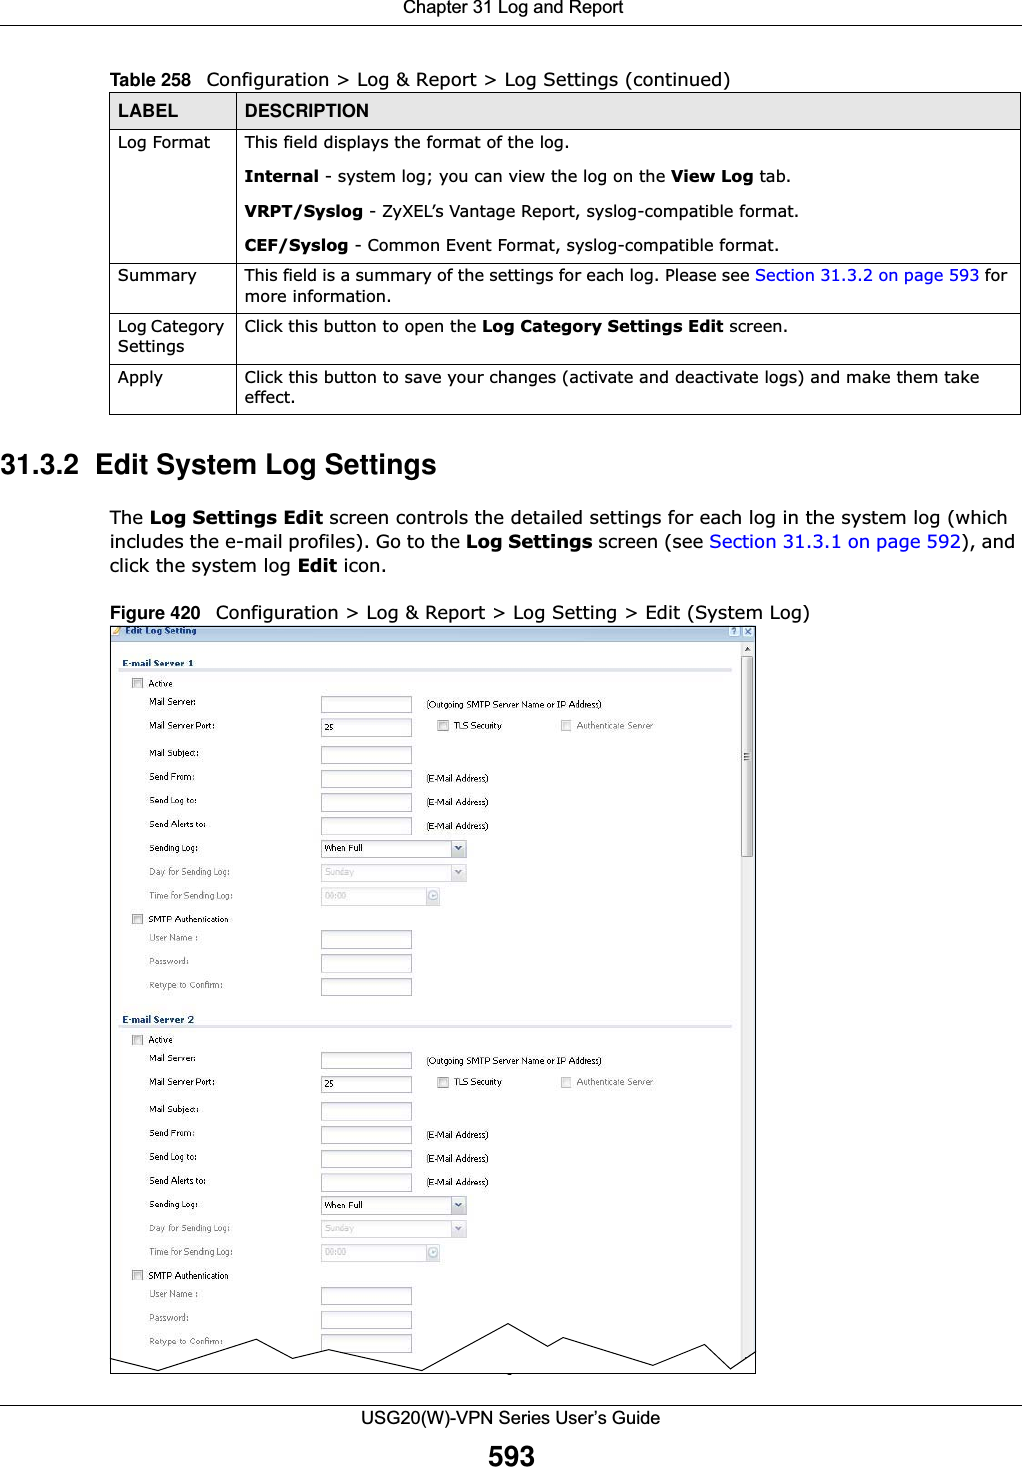  Chapter 31 Log and ReportUSG20(W)-VPN Series User’s Guide59331.3.2  Edit System Log Settings The Log Settings Edit screen controls the detailed settings for each log in the system log (which includes the e-mail profiles). Go to the Log Settings screen (see Section 31.3.1 on page 592), and click the system log Edit icon.Figure 420   Configuration &gt; Log &amp; Report &gt; Log Setting &gt; Edit (System Log)    Log Format This field displays the format of the log. Internal - system log; you can view the log on the View Log tab.VRPT/Syslog - ZyXEL’s Vantage Report, syslog-compatible format.CEF/Syslog - Common Event Format, syslog-compatible format.Summary This field is a summary of the settings for each log. Please see Section 31.3.2 on page 593 for more information.Log Category SettingsClick this button to open the Log Category Settings Edit screen.Apply Click this button to save your changes (activate and deactivate logs) and make them take effect.Table 258   Configuration &gt; Log &amp; Report &gt; Log Settings (continued)LABEL DESCRIPTION